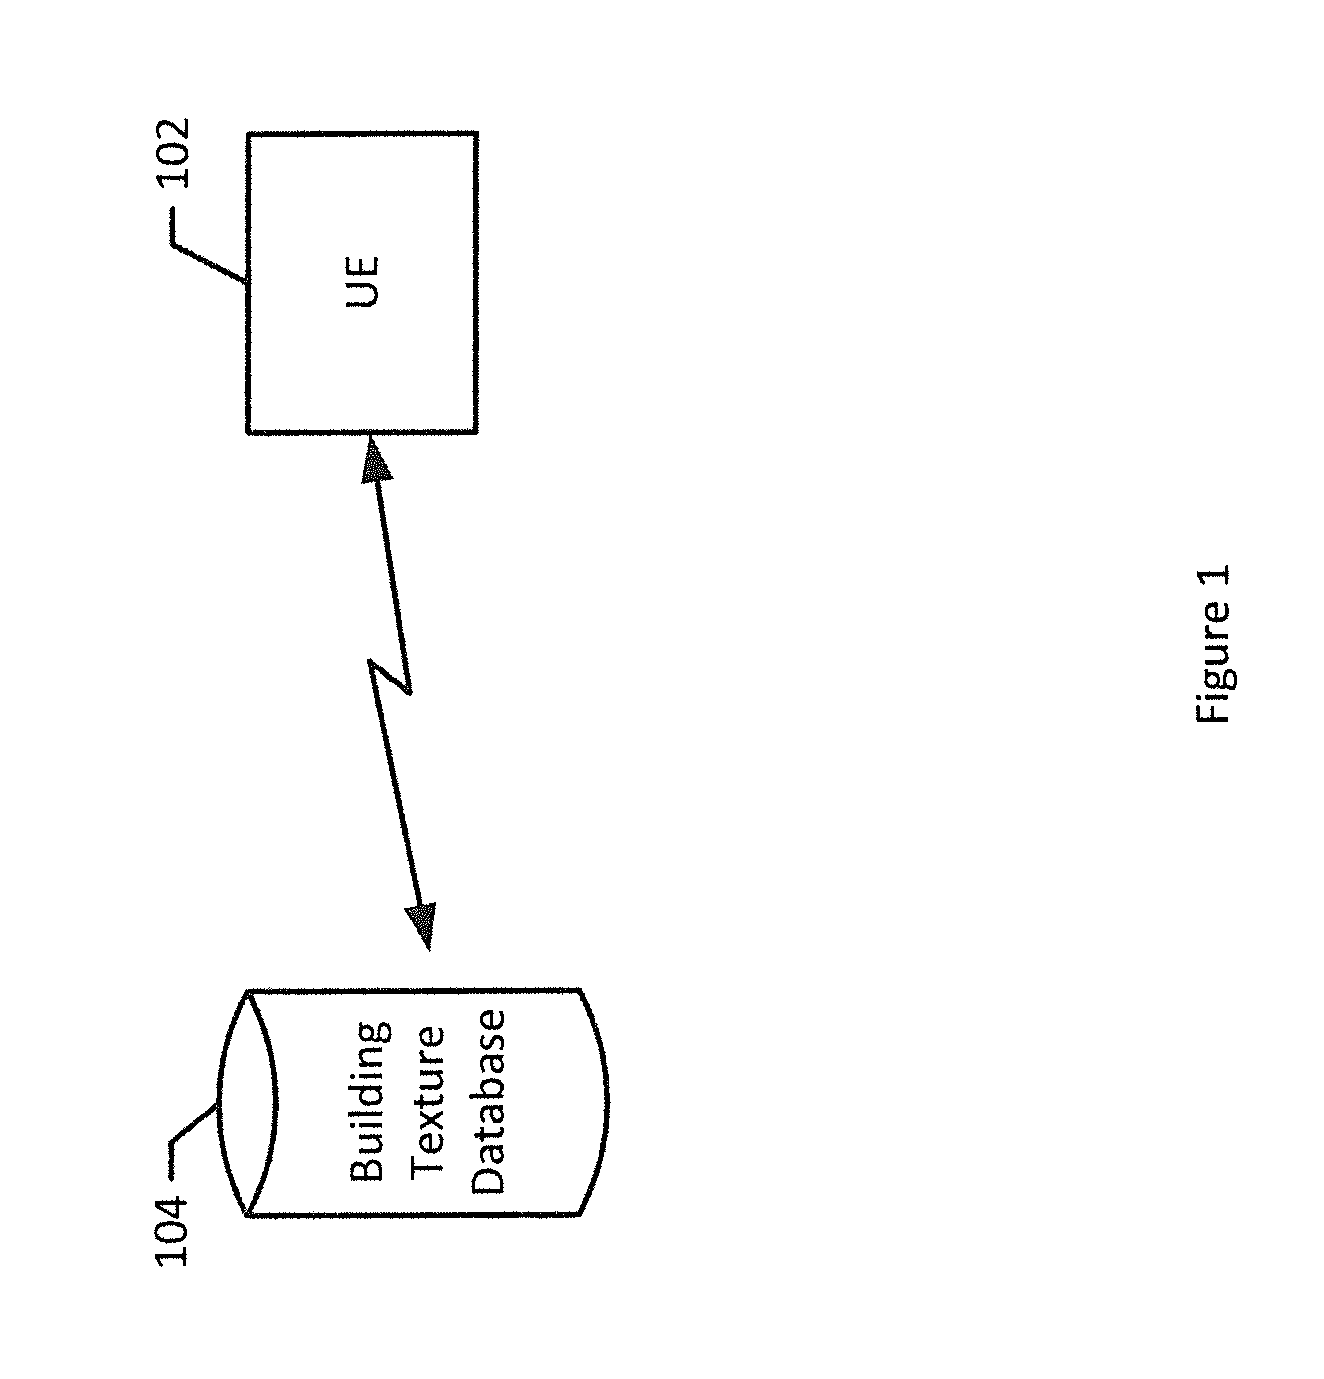 Method and apparatus for determining a building location based on a building image